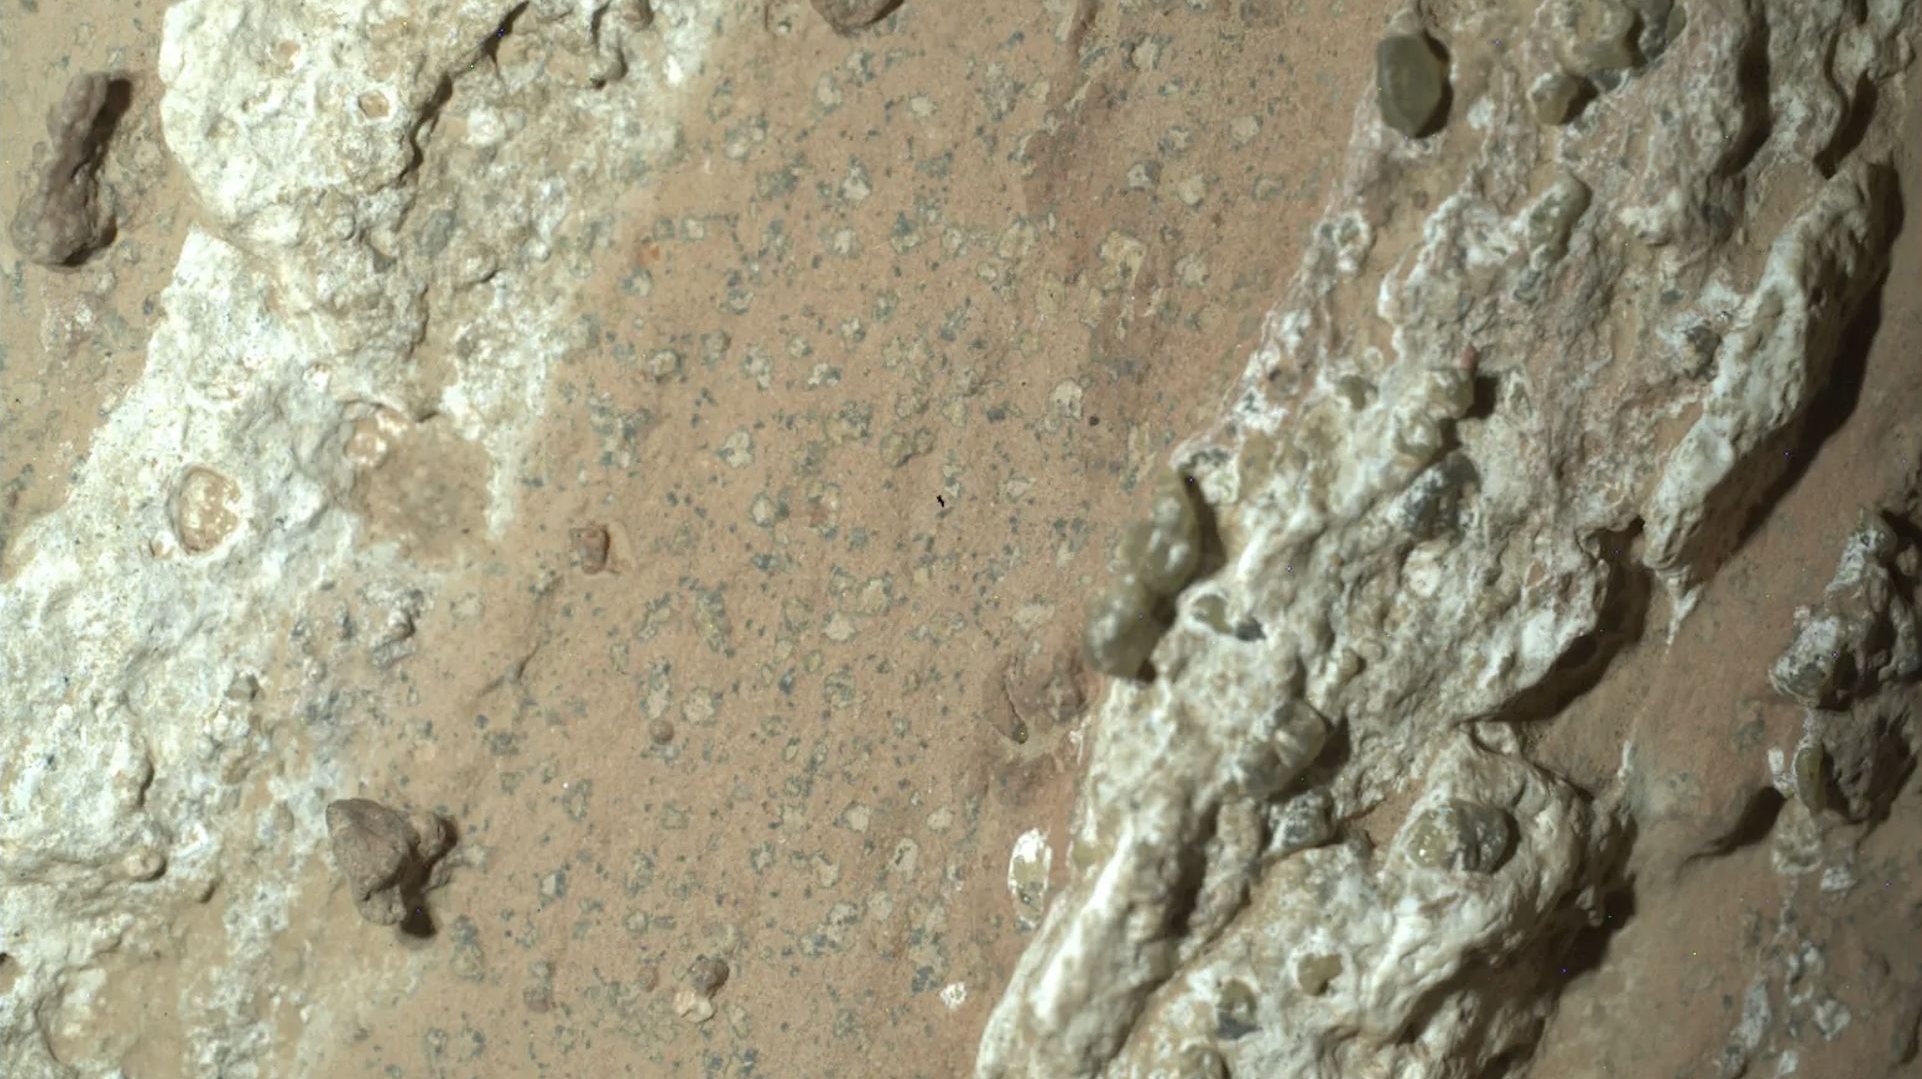 NASA believes it has found signs of microbial life in rocks on Mars